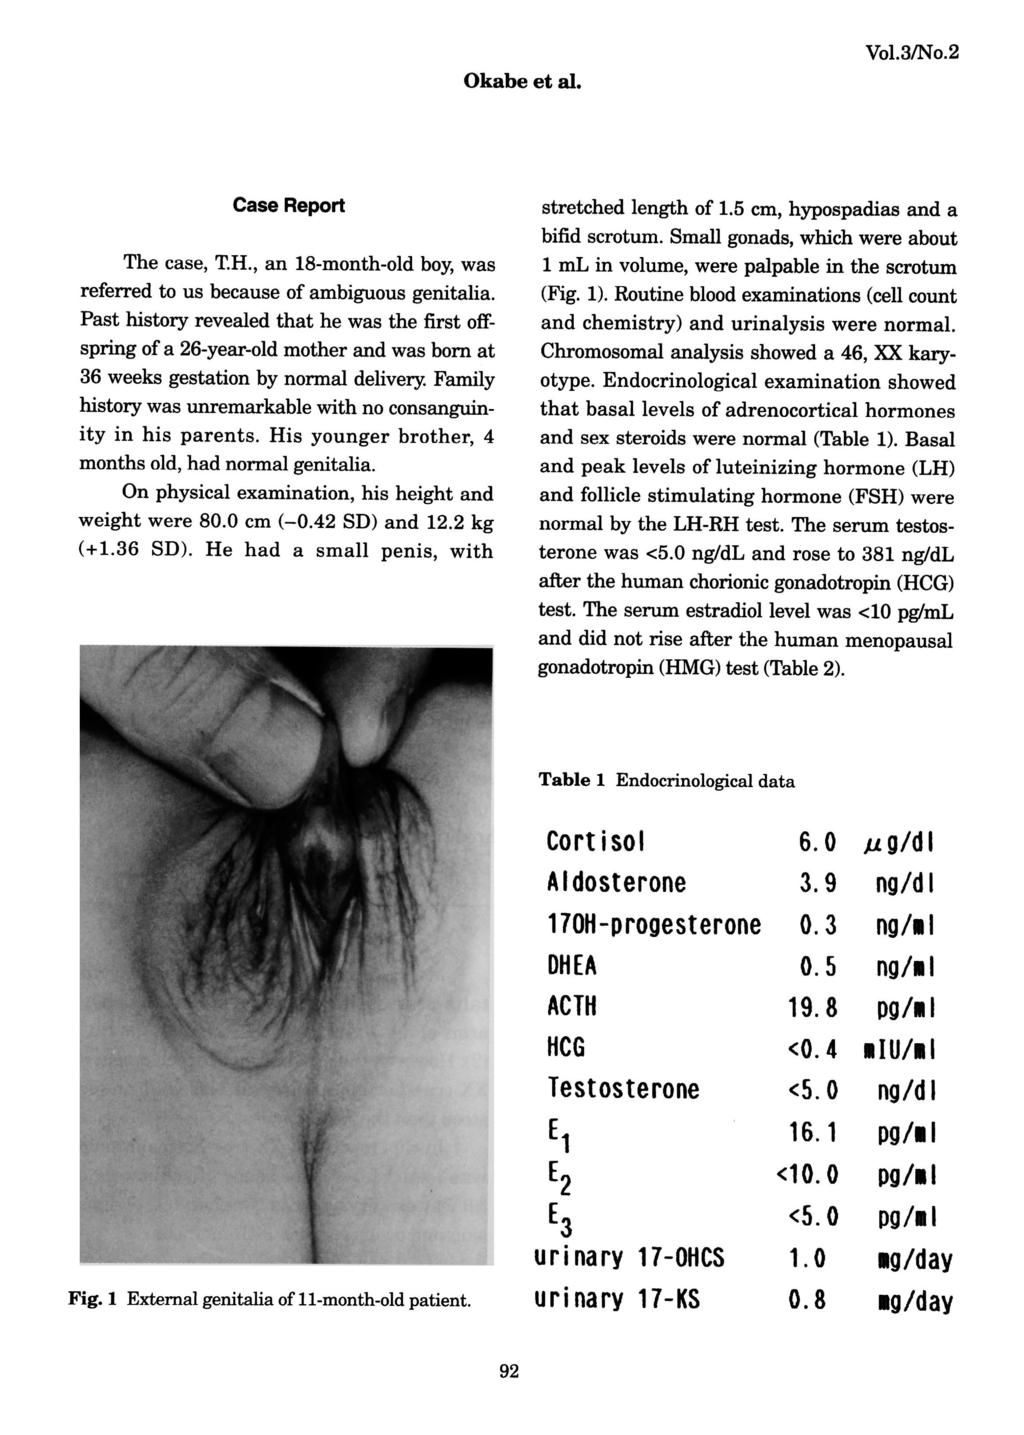 Vol.3/No.2 Okabe et al. Case Report The case, T.H., an 18-month-old boy, was referred to us because of ambiguous genitalia.